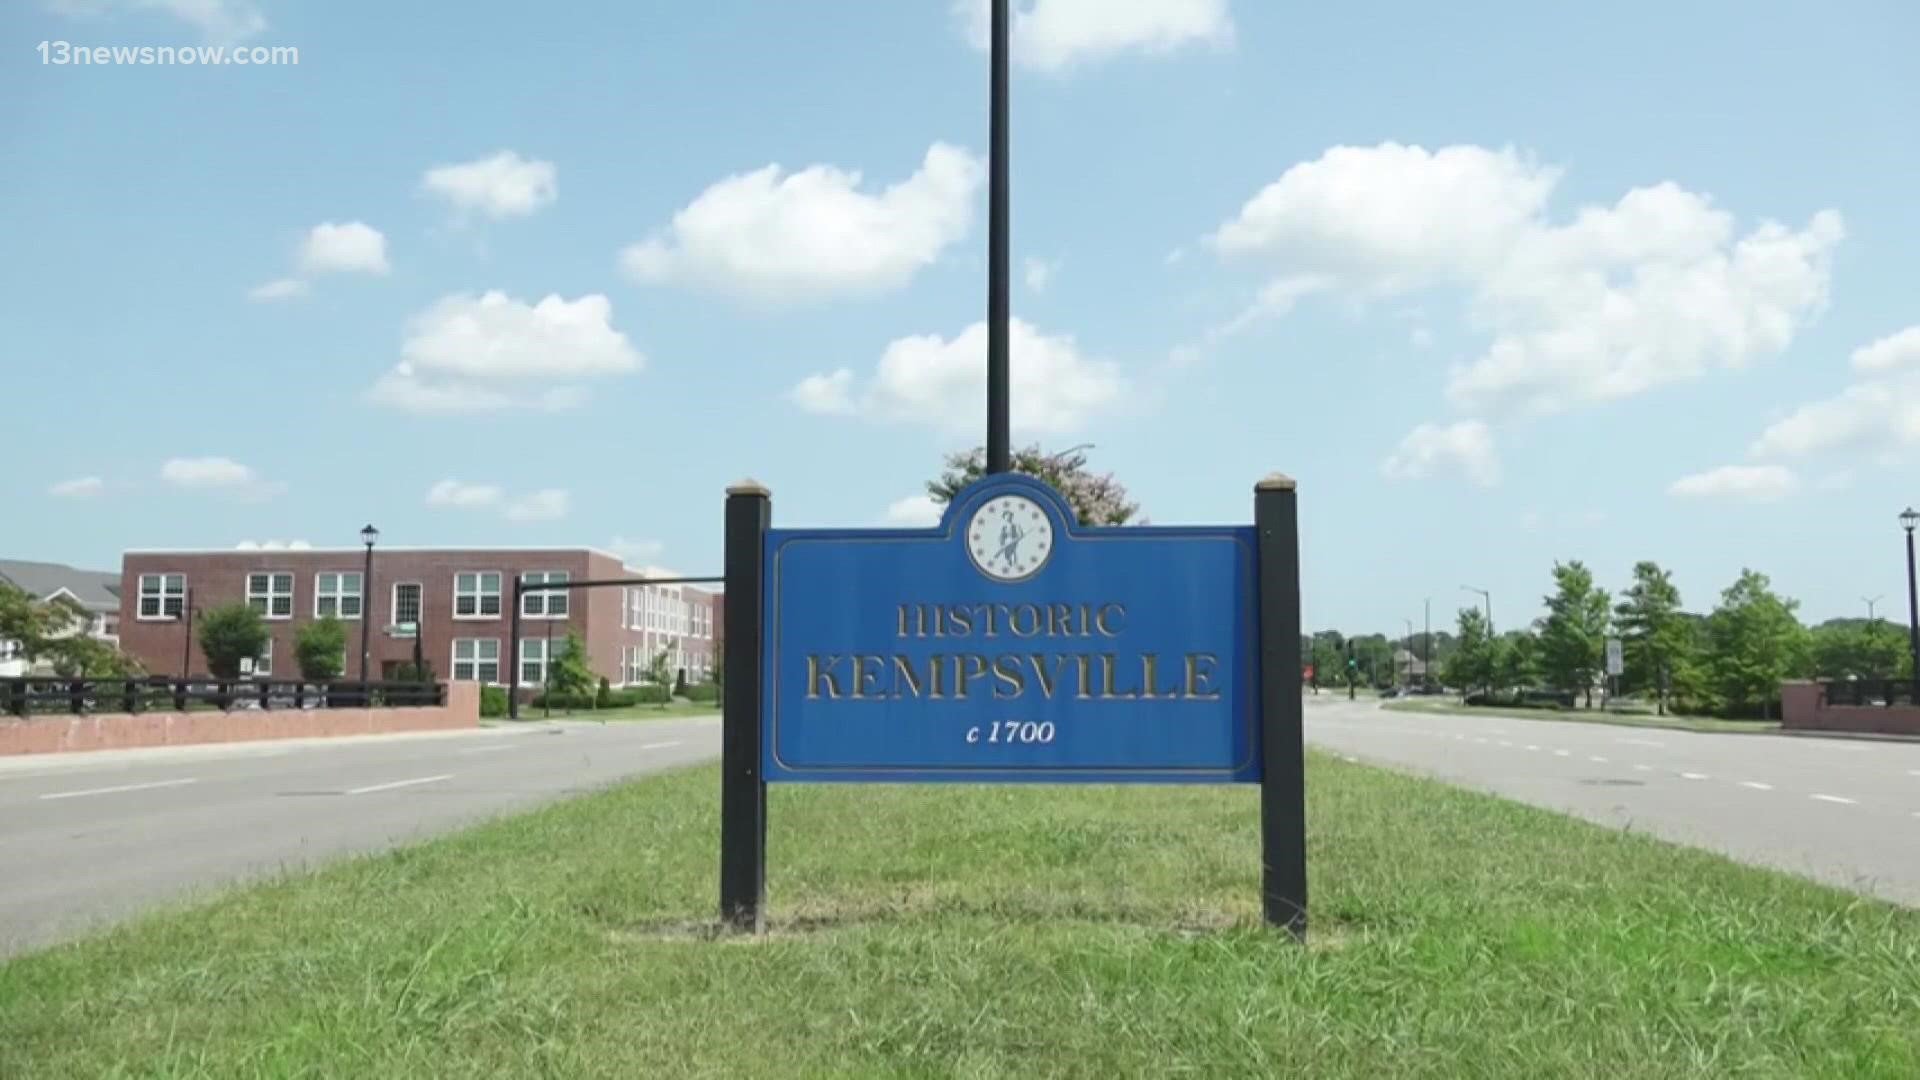 City council unanimously selected Rocky Holcomb, a former state delegate, to fill the Kempsville seat vacated after Jessica Abbott resigned last month.